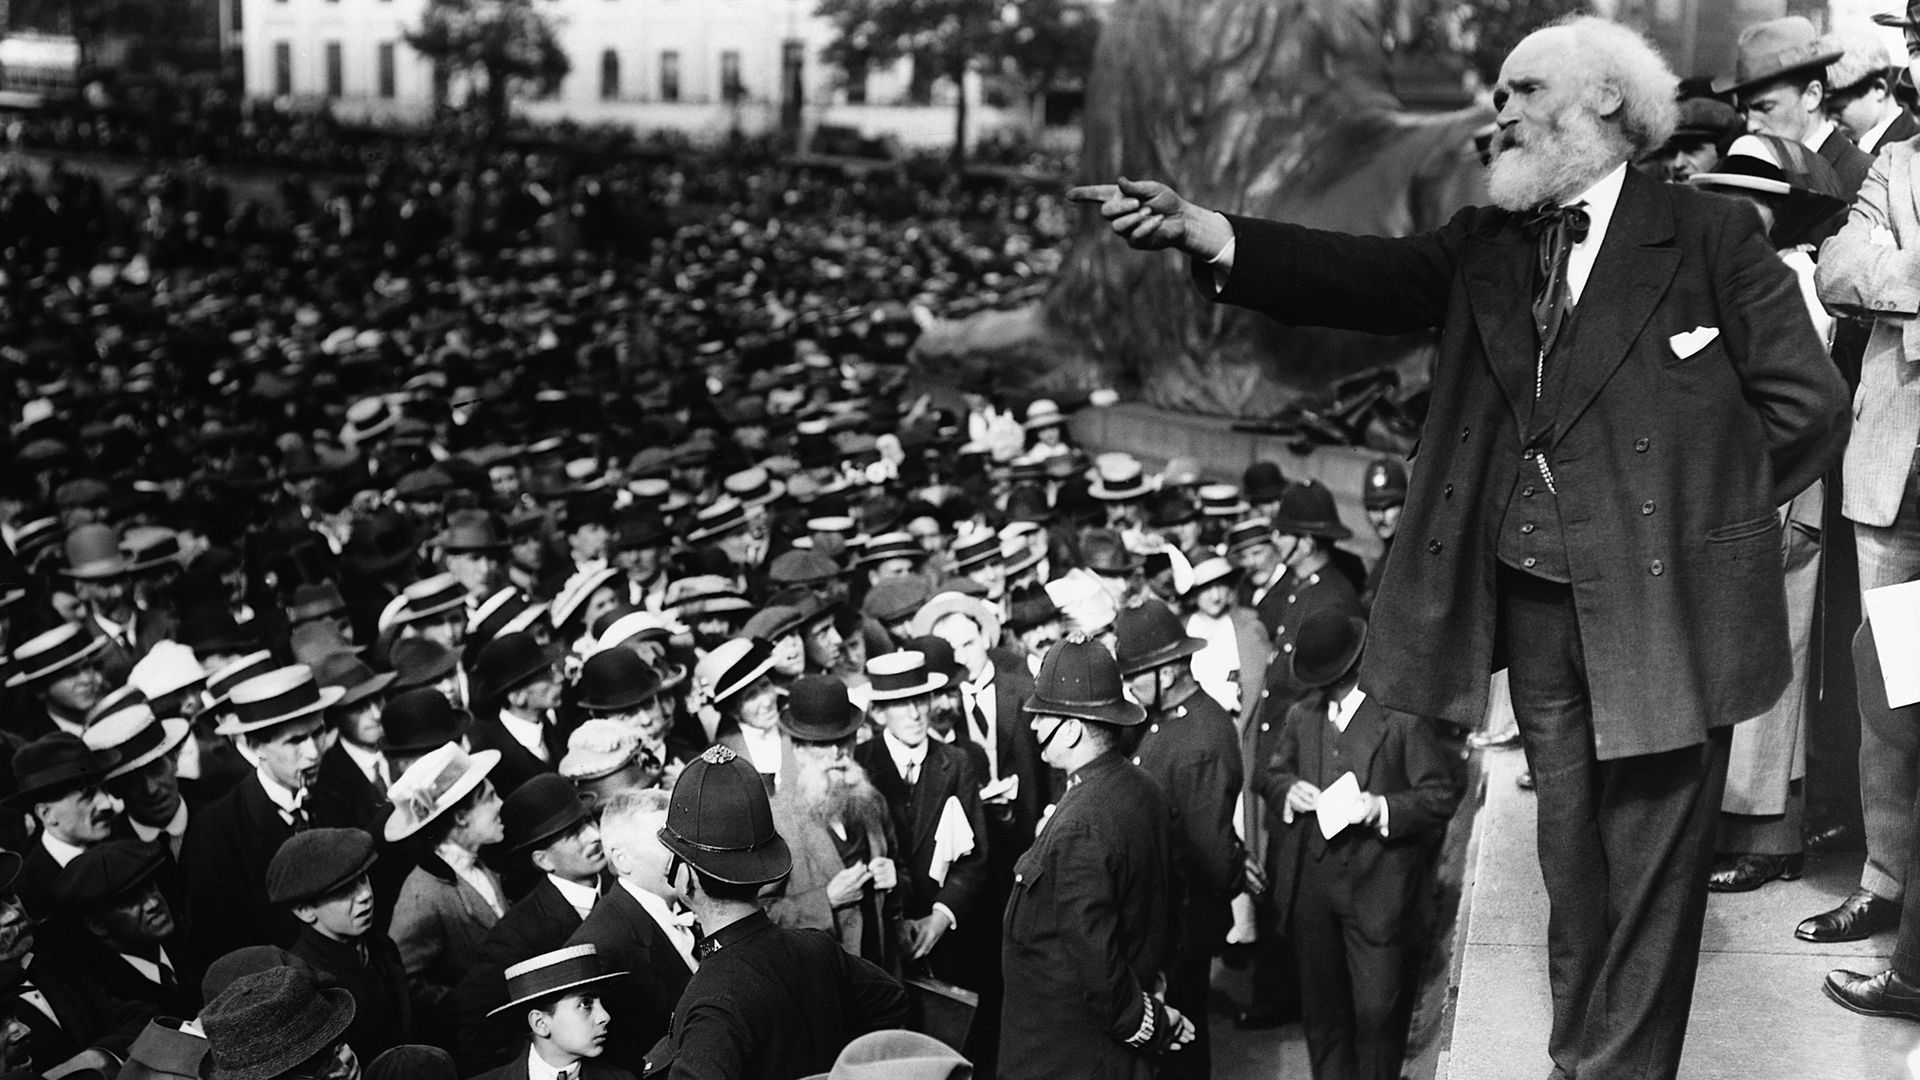 Former Labour leader Keir Hardie puts his lay preaching skills to good use as he addresses a crowd at a peace demonstration in Trafalgar Square in 1914 - Credit: Corbis via Getty Images